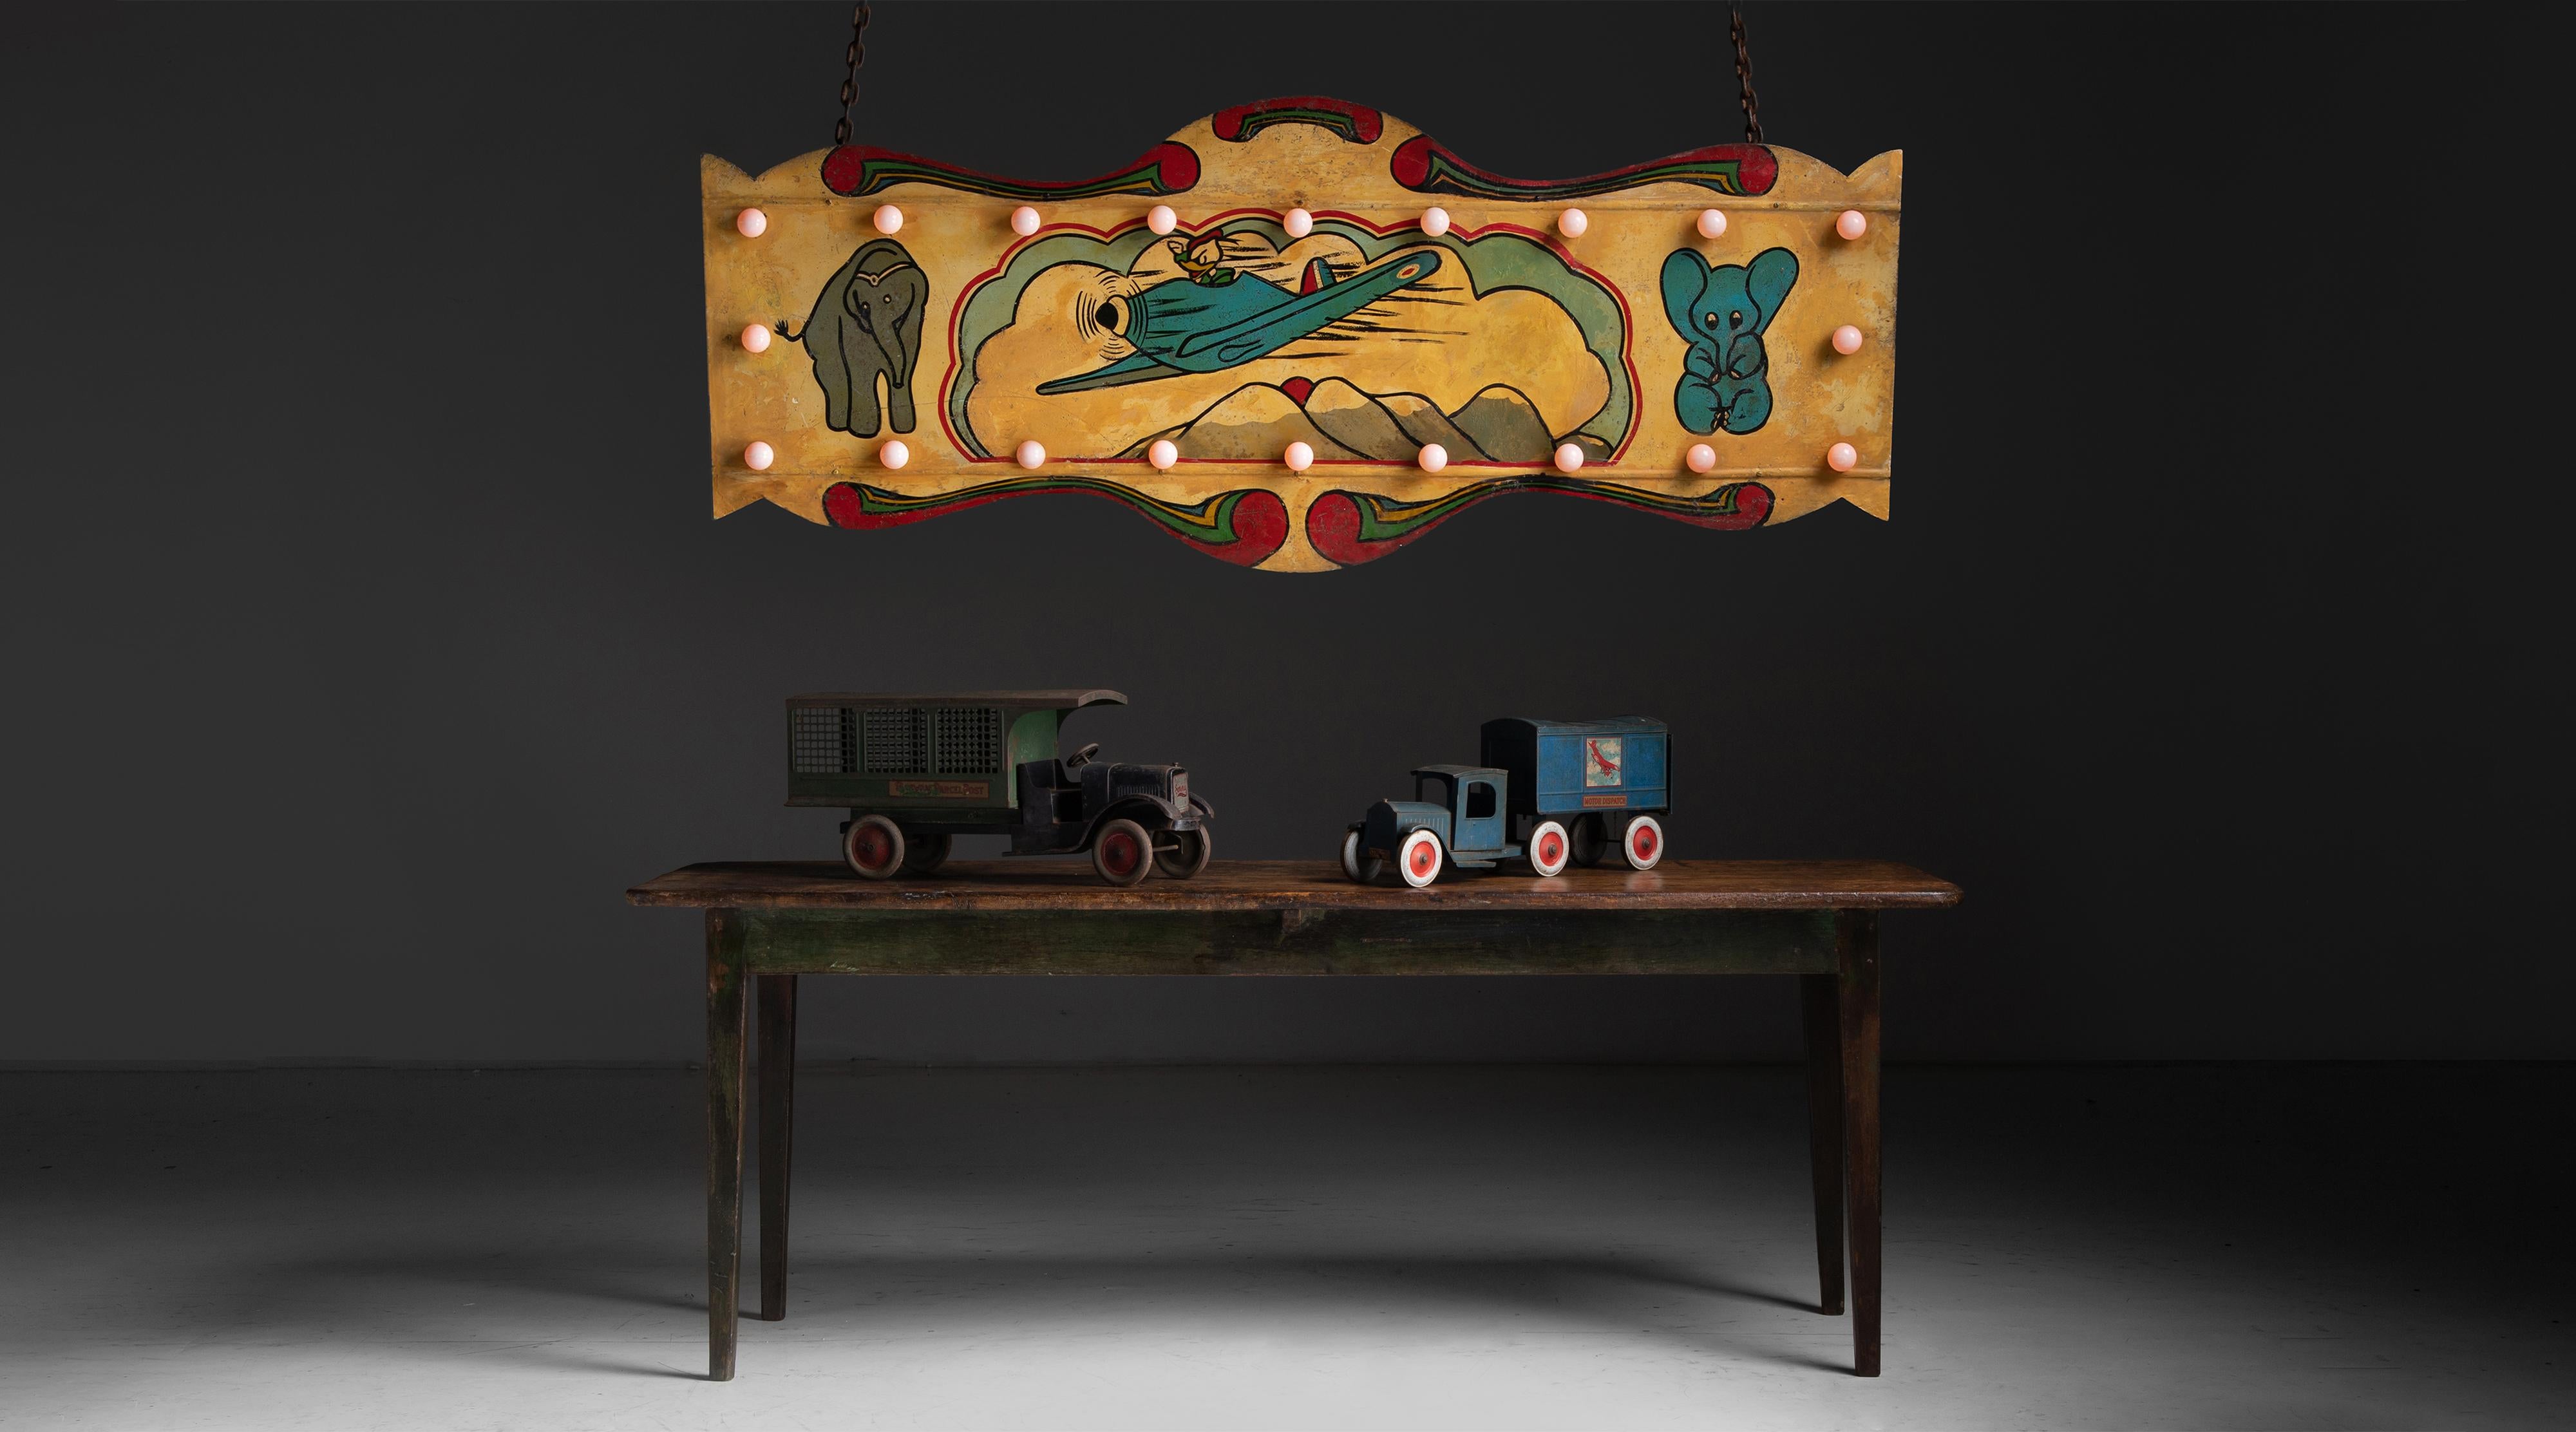 Structo motor dispatch toy truck, America circa 1930

Pressed steel toy truck in original painted finish

Measures 23.5”L x 6”d x 9.5”h.